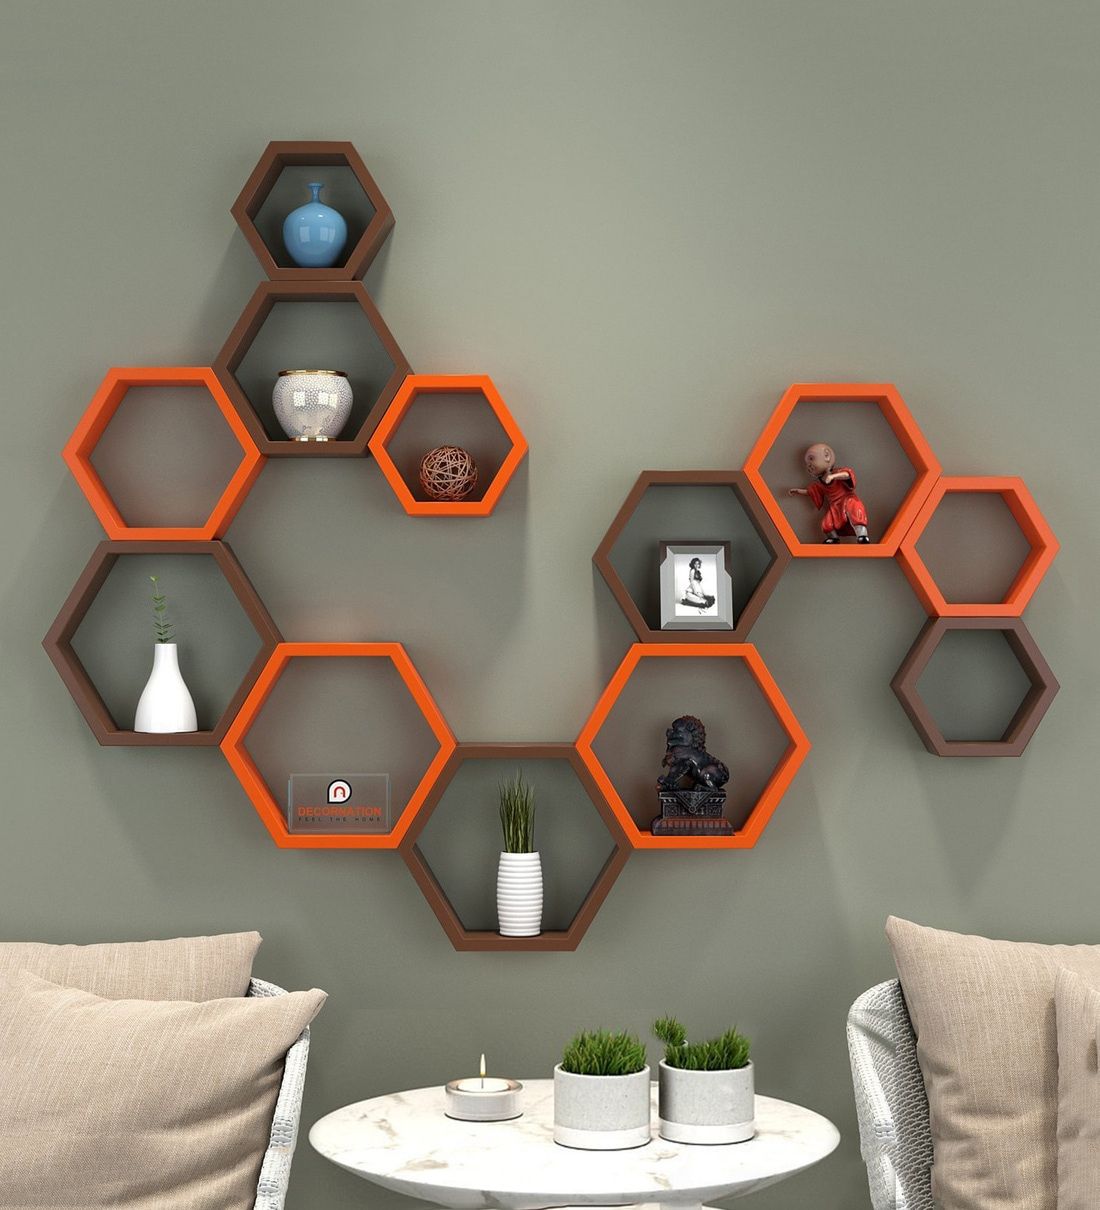 Buy Set Of 12 Engineered Wood Hexagon Shape Wall Shelf In Multicolour Intended For Wall Art With Shelves (View 14 of 15)